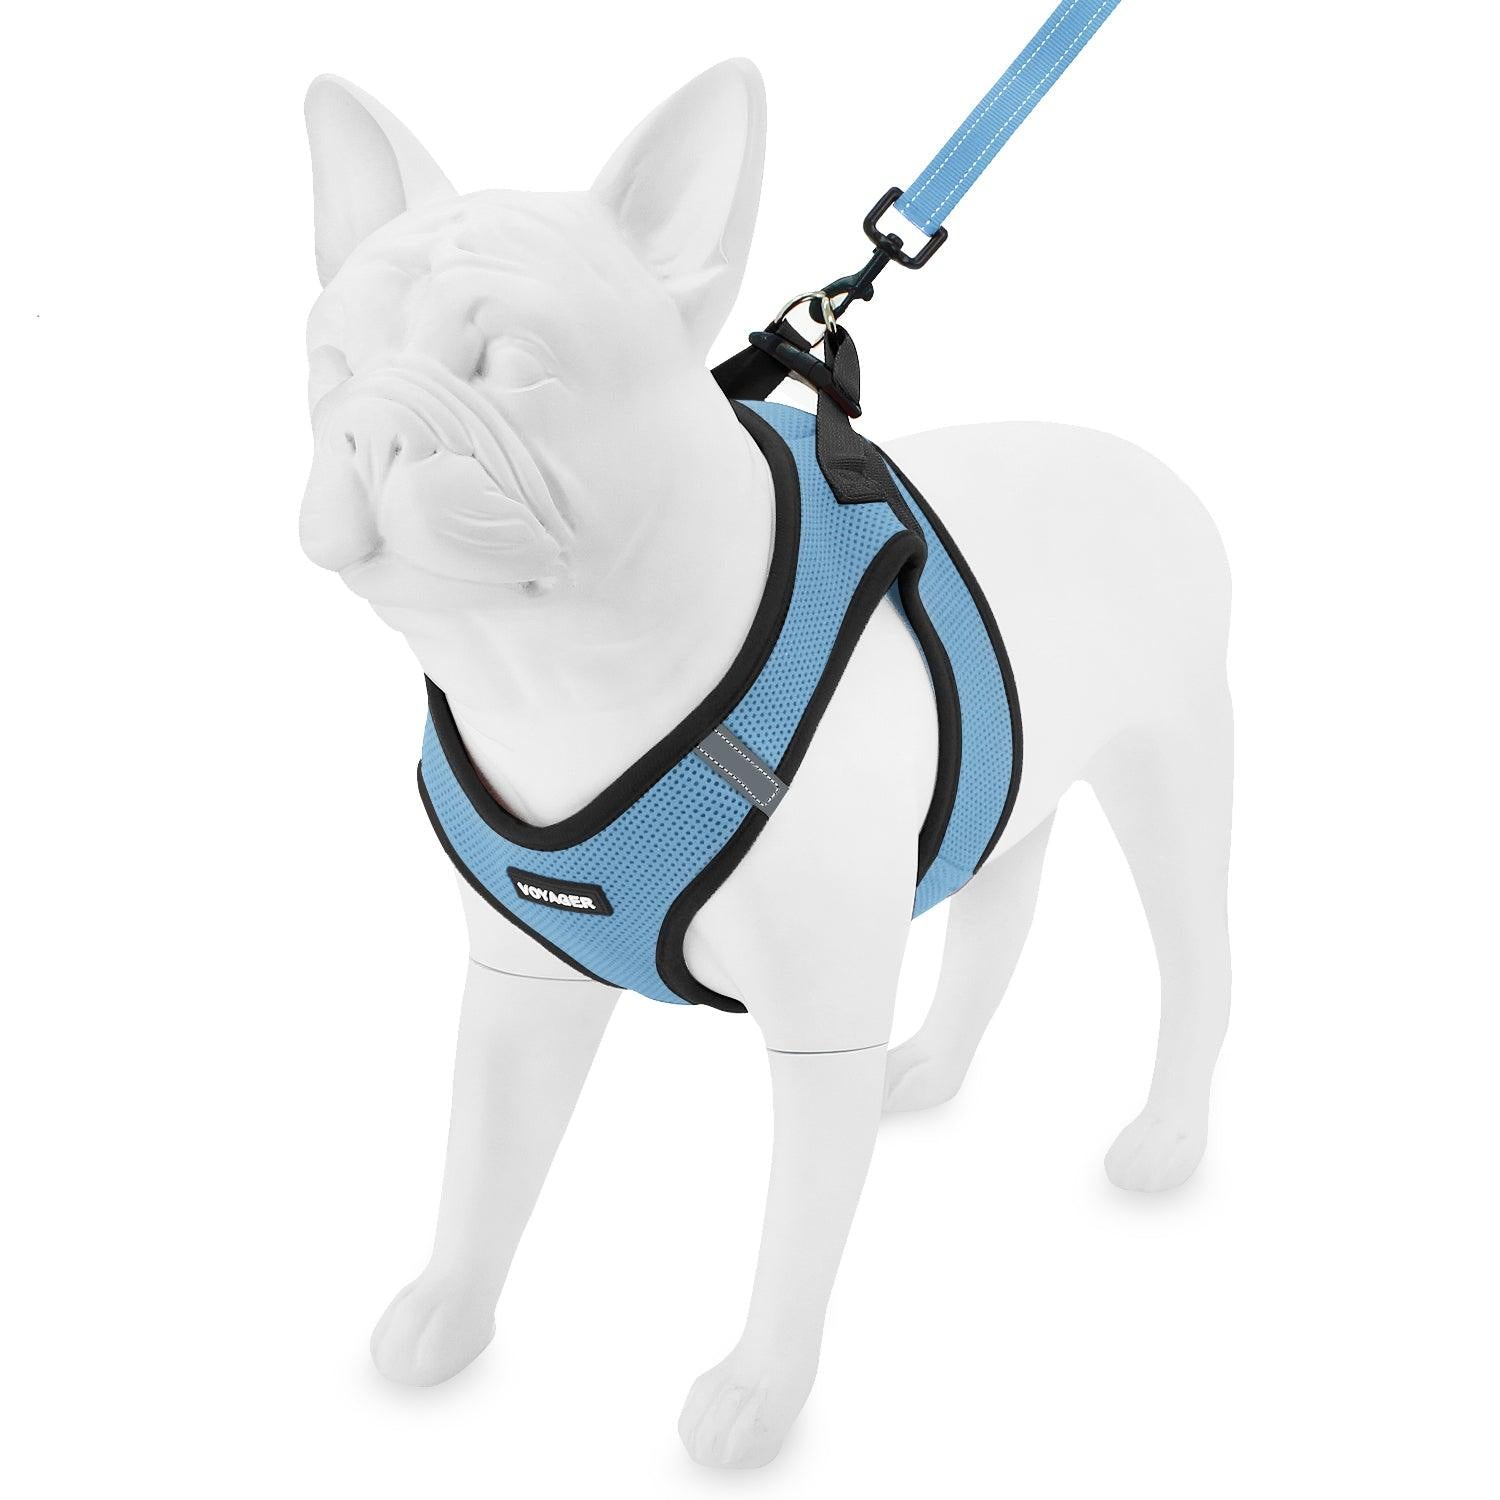 Step-in Air Harness & Leash Set - VOYAGER Dog Harnesses